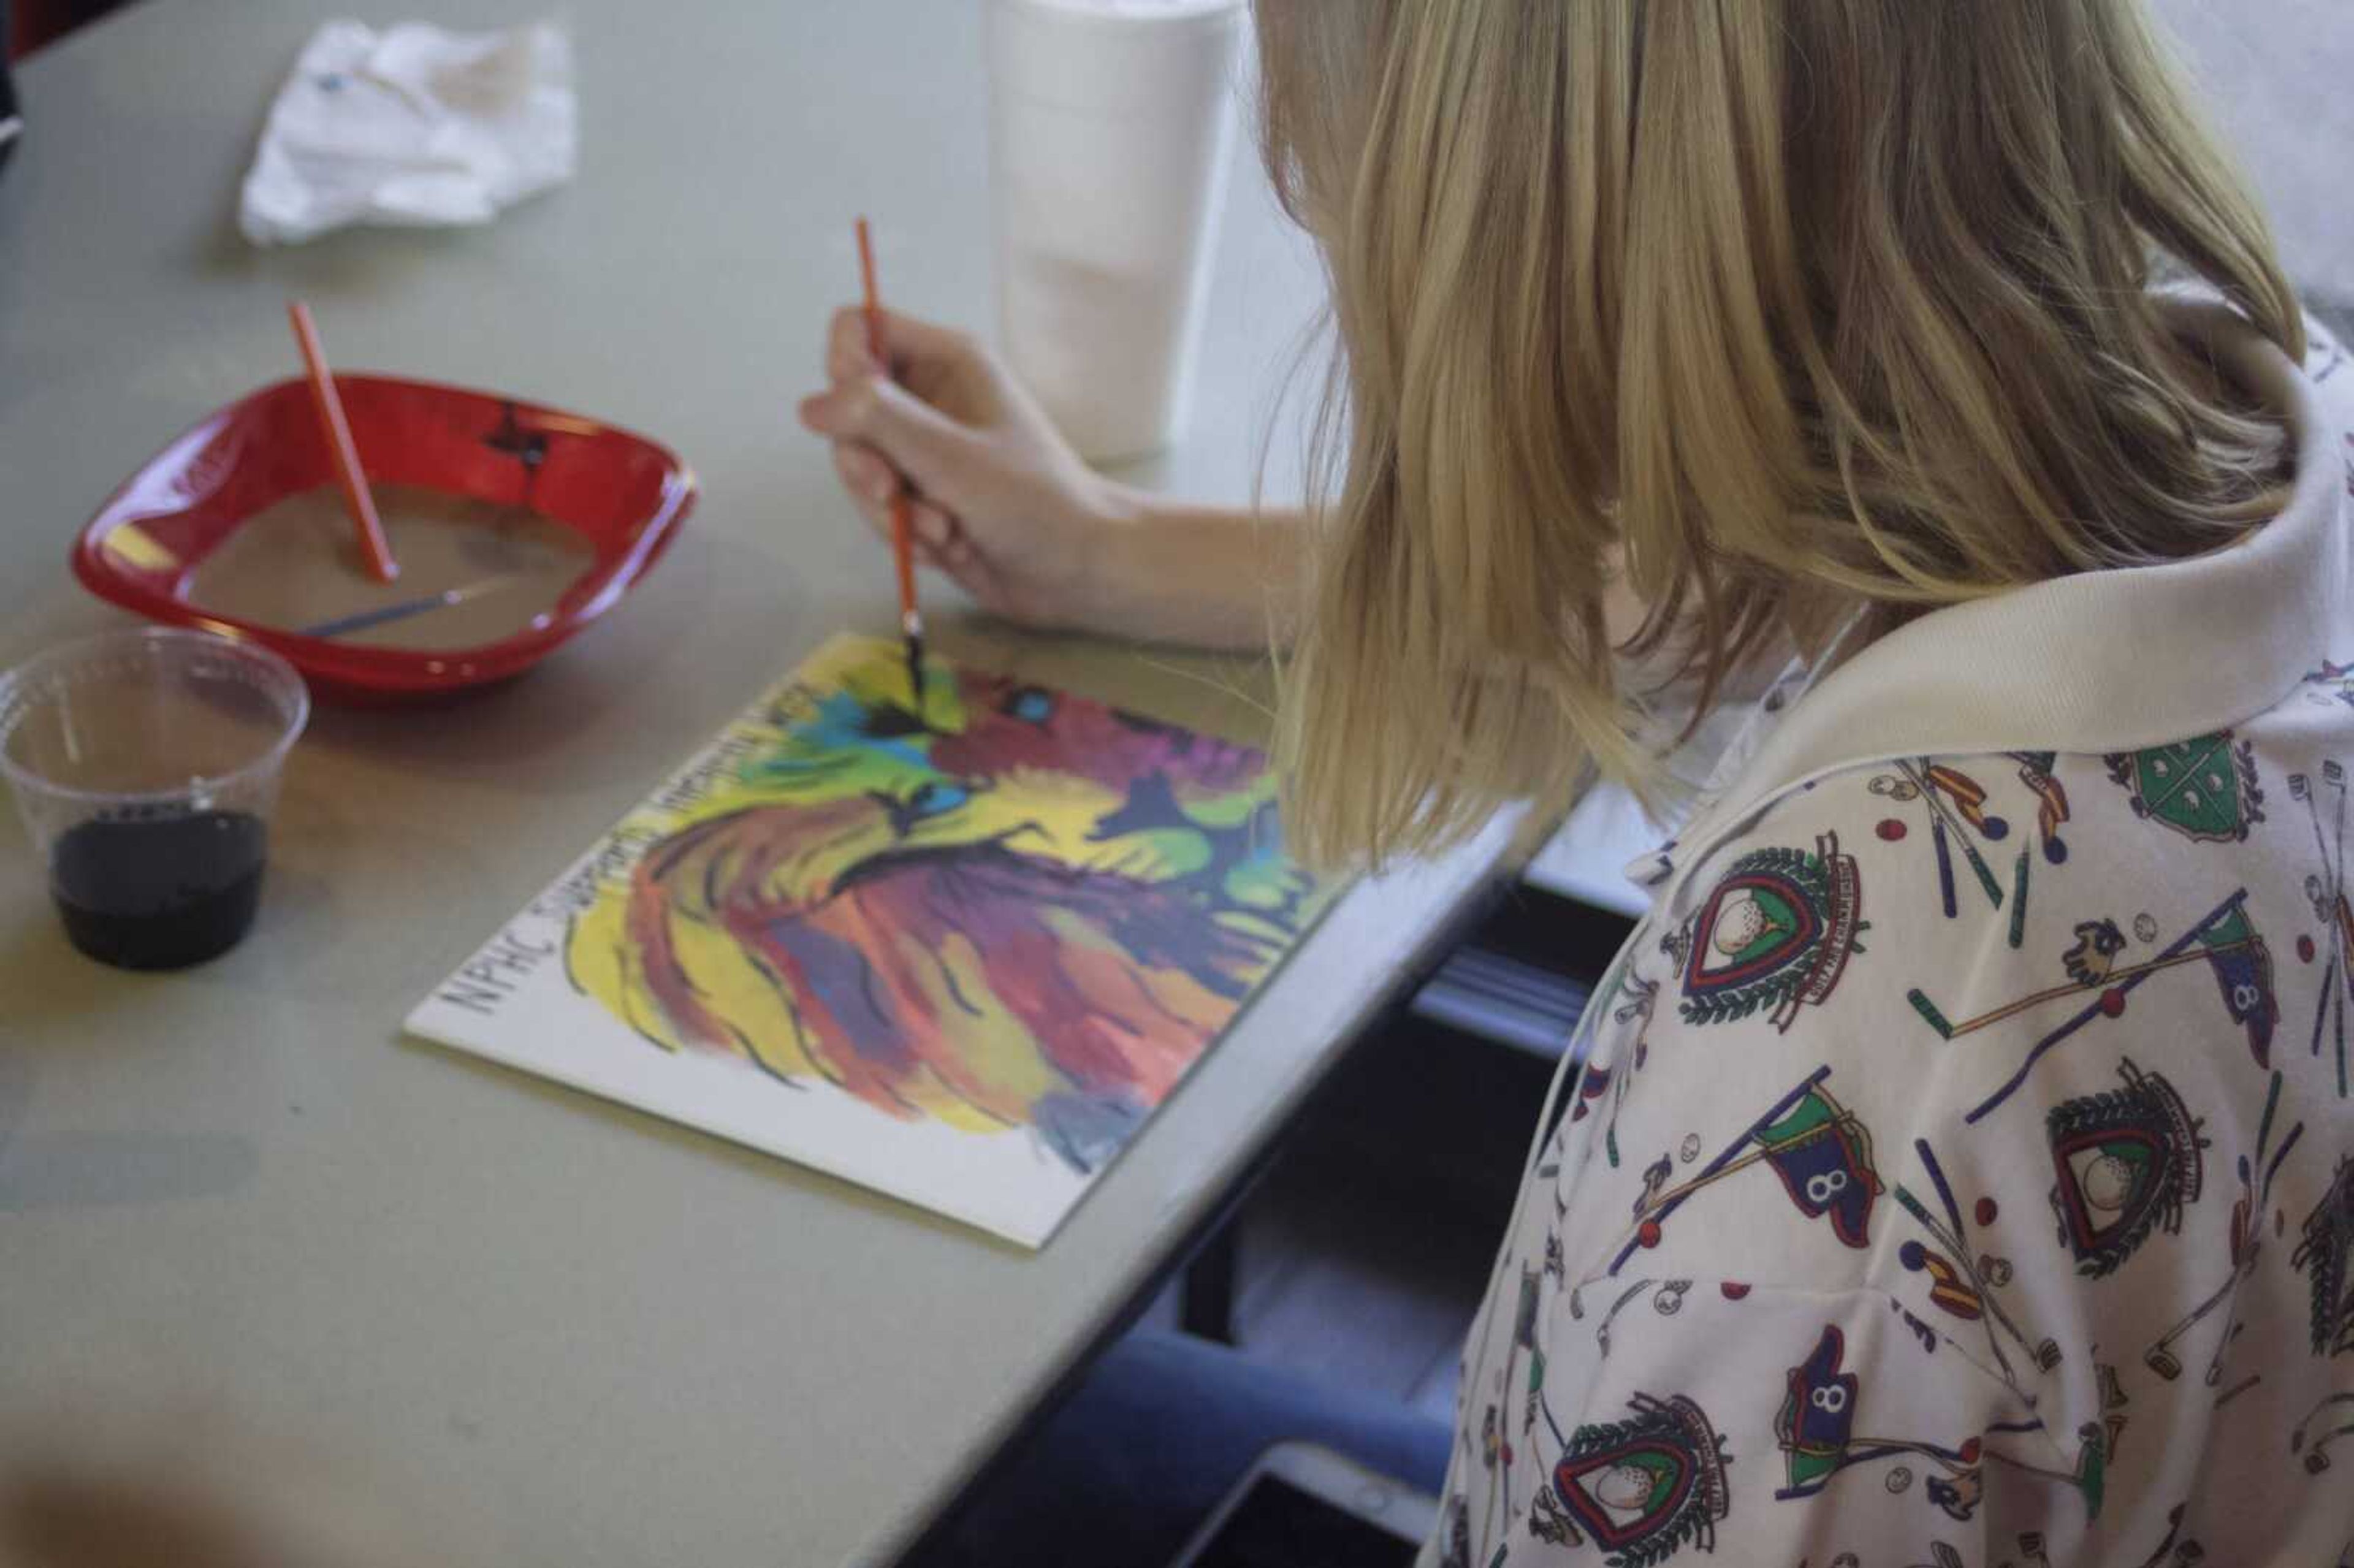 Rachel Kroeger, freshman at Southeast painting a picture of a lion to represent integrity